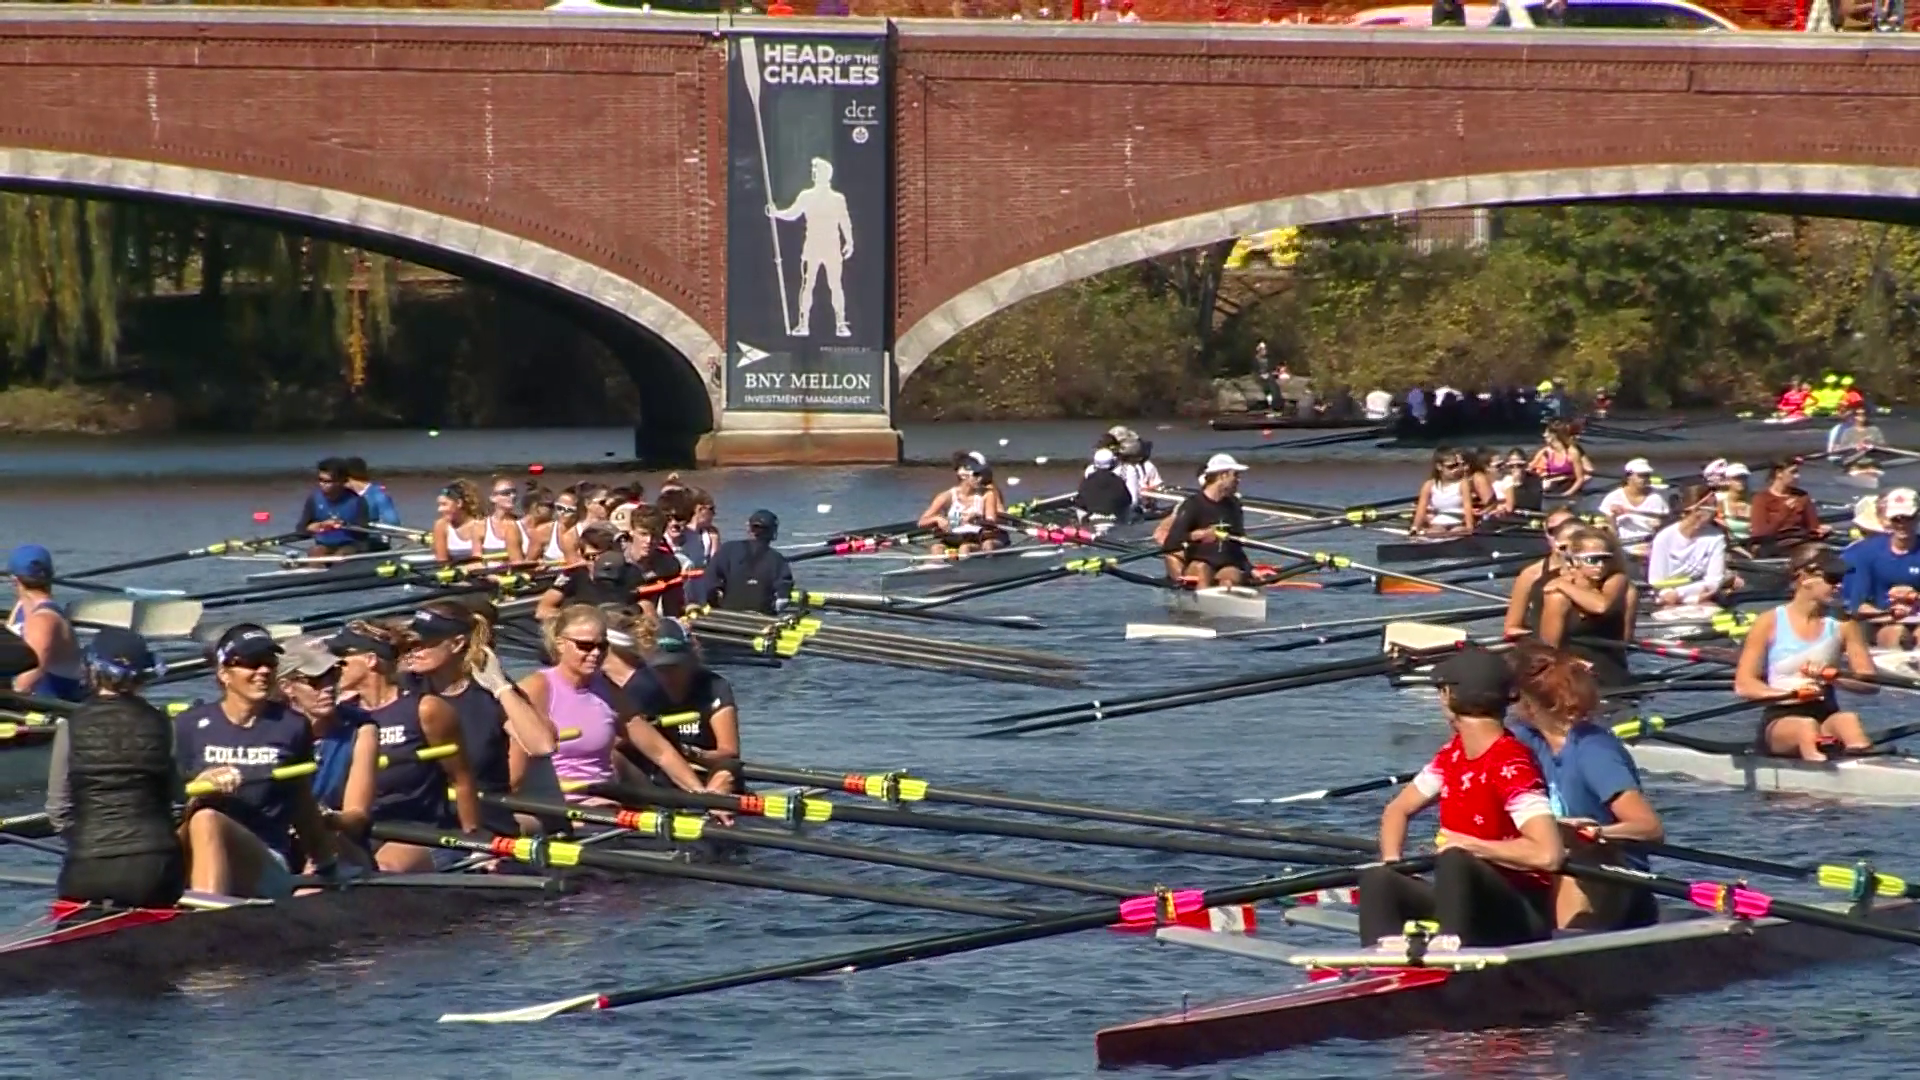 Insiders guide to this weekends storied Head of the Charles Regatta